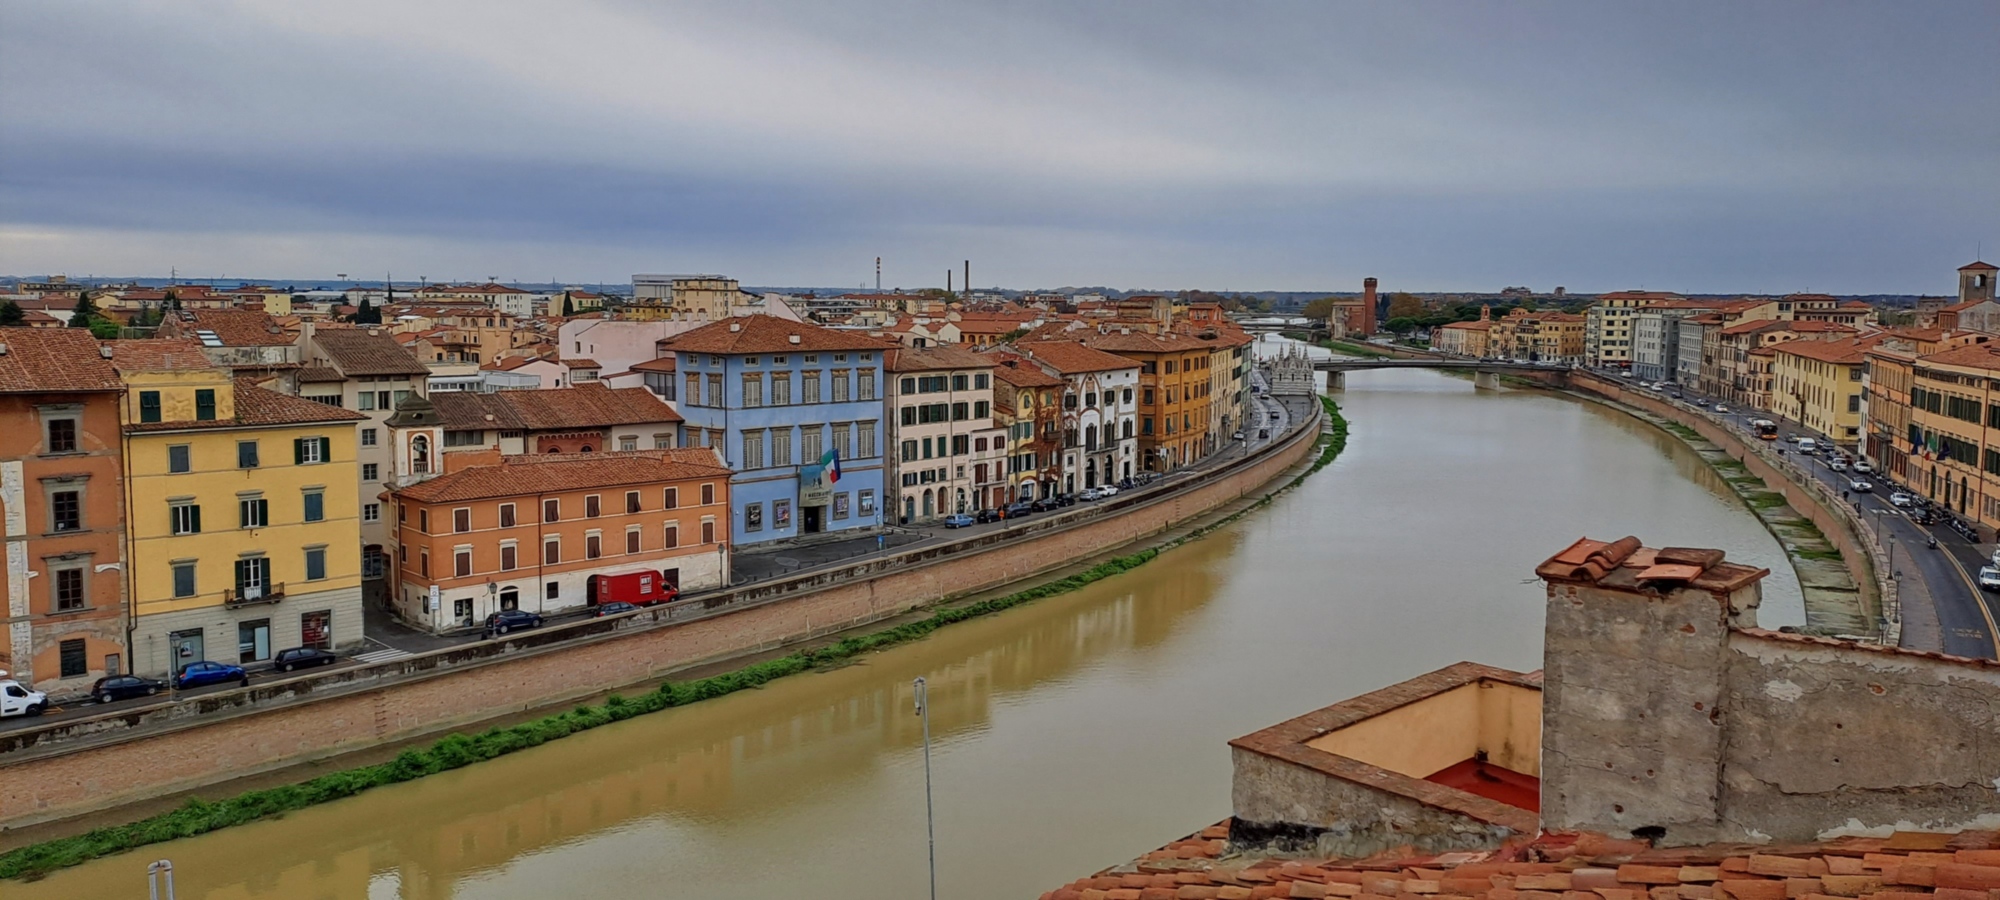 Enjoy a 2-hour small group guided walking tour in Pisa